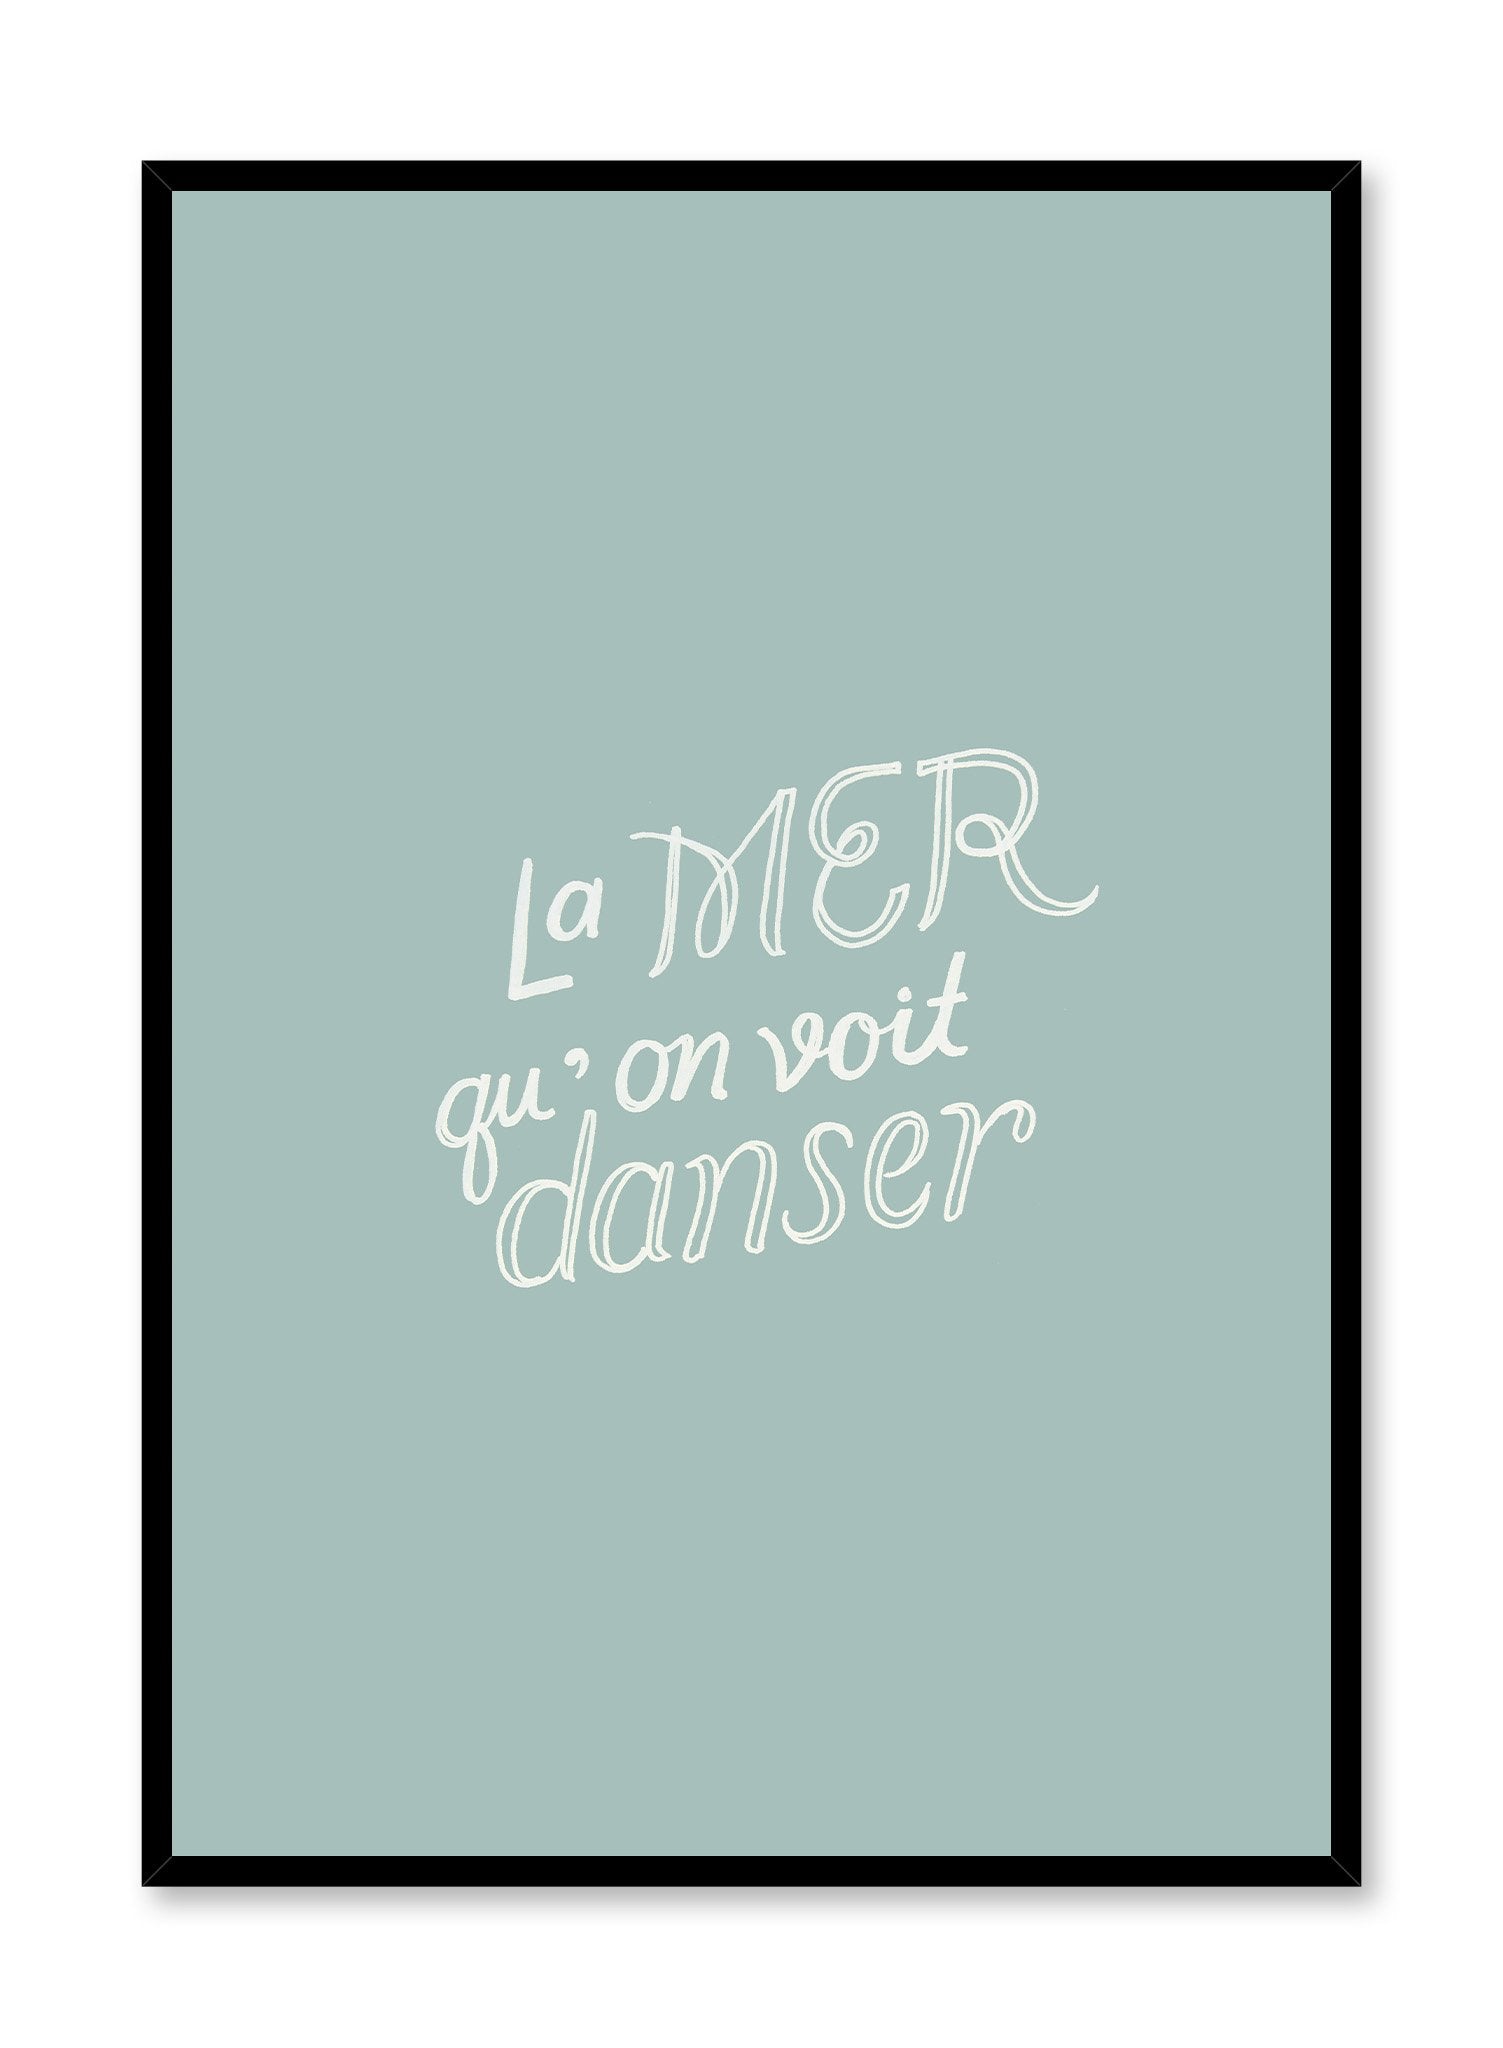 Dancing Sea is a minimalist typography of the words 'La mer qu'on voit danser' in different writing styles by Opposite Wall.